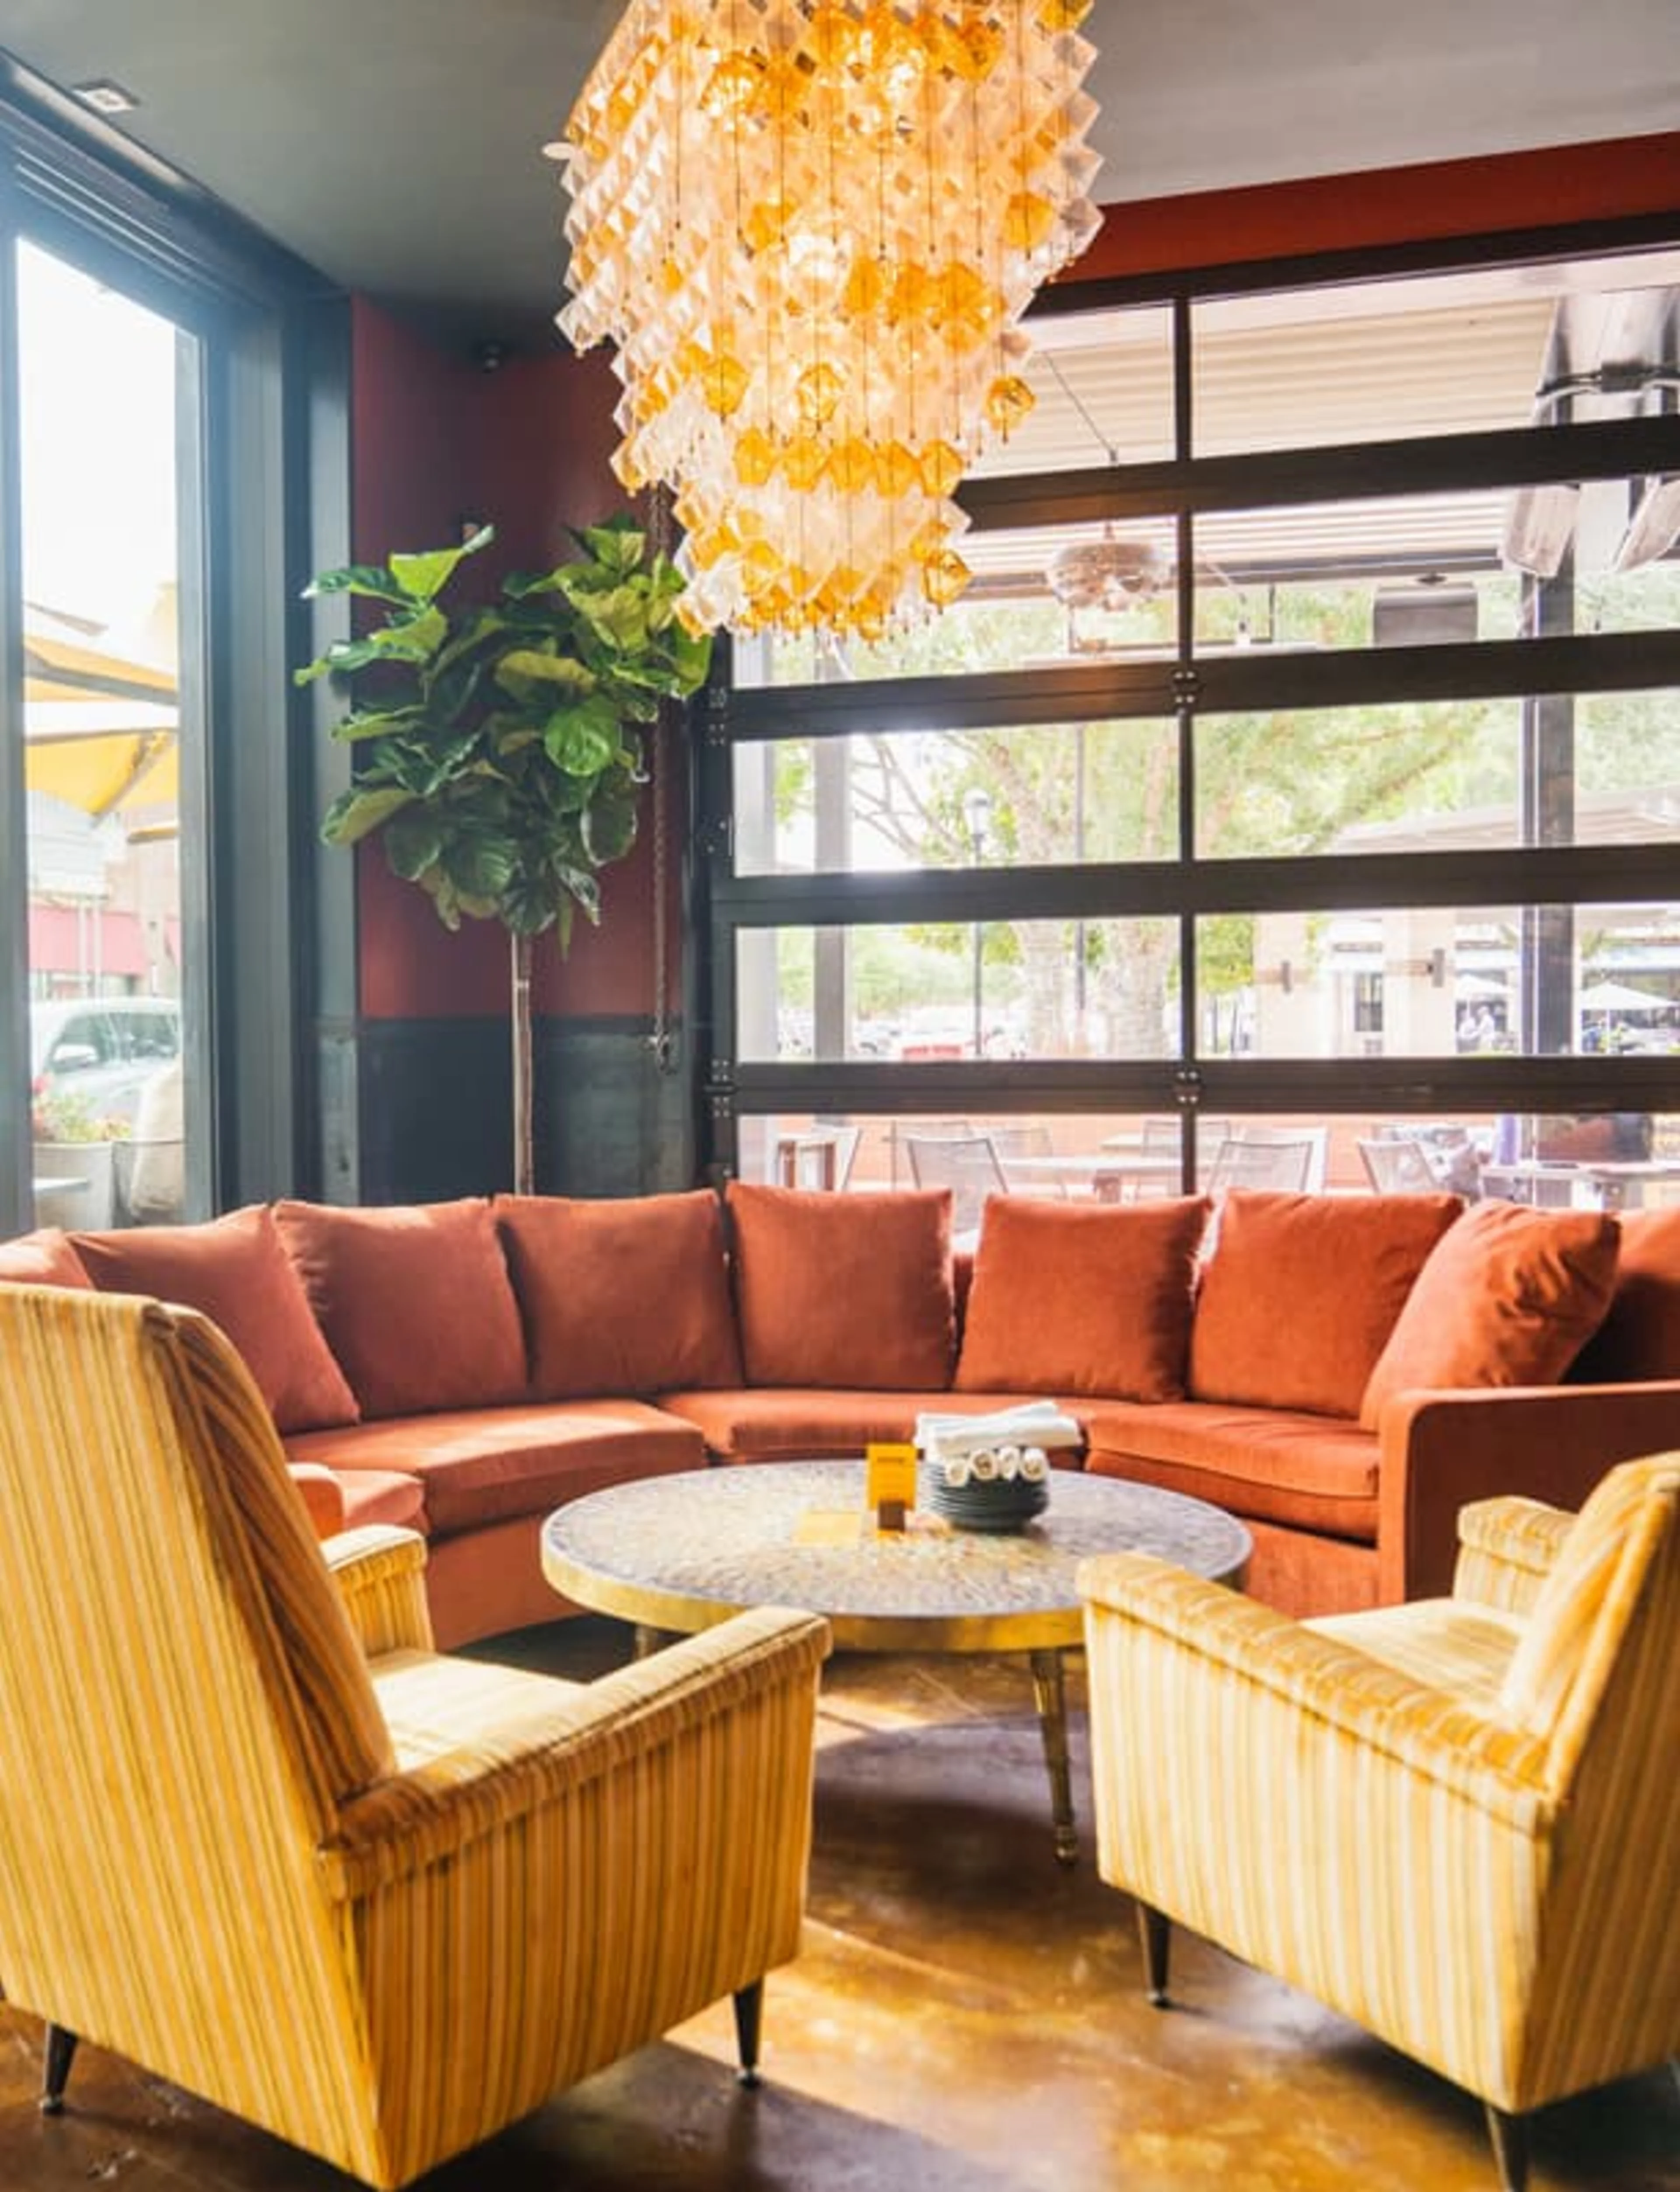 A large orange couch with a large glass chandelier above it.